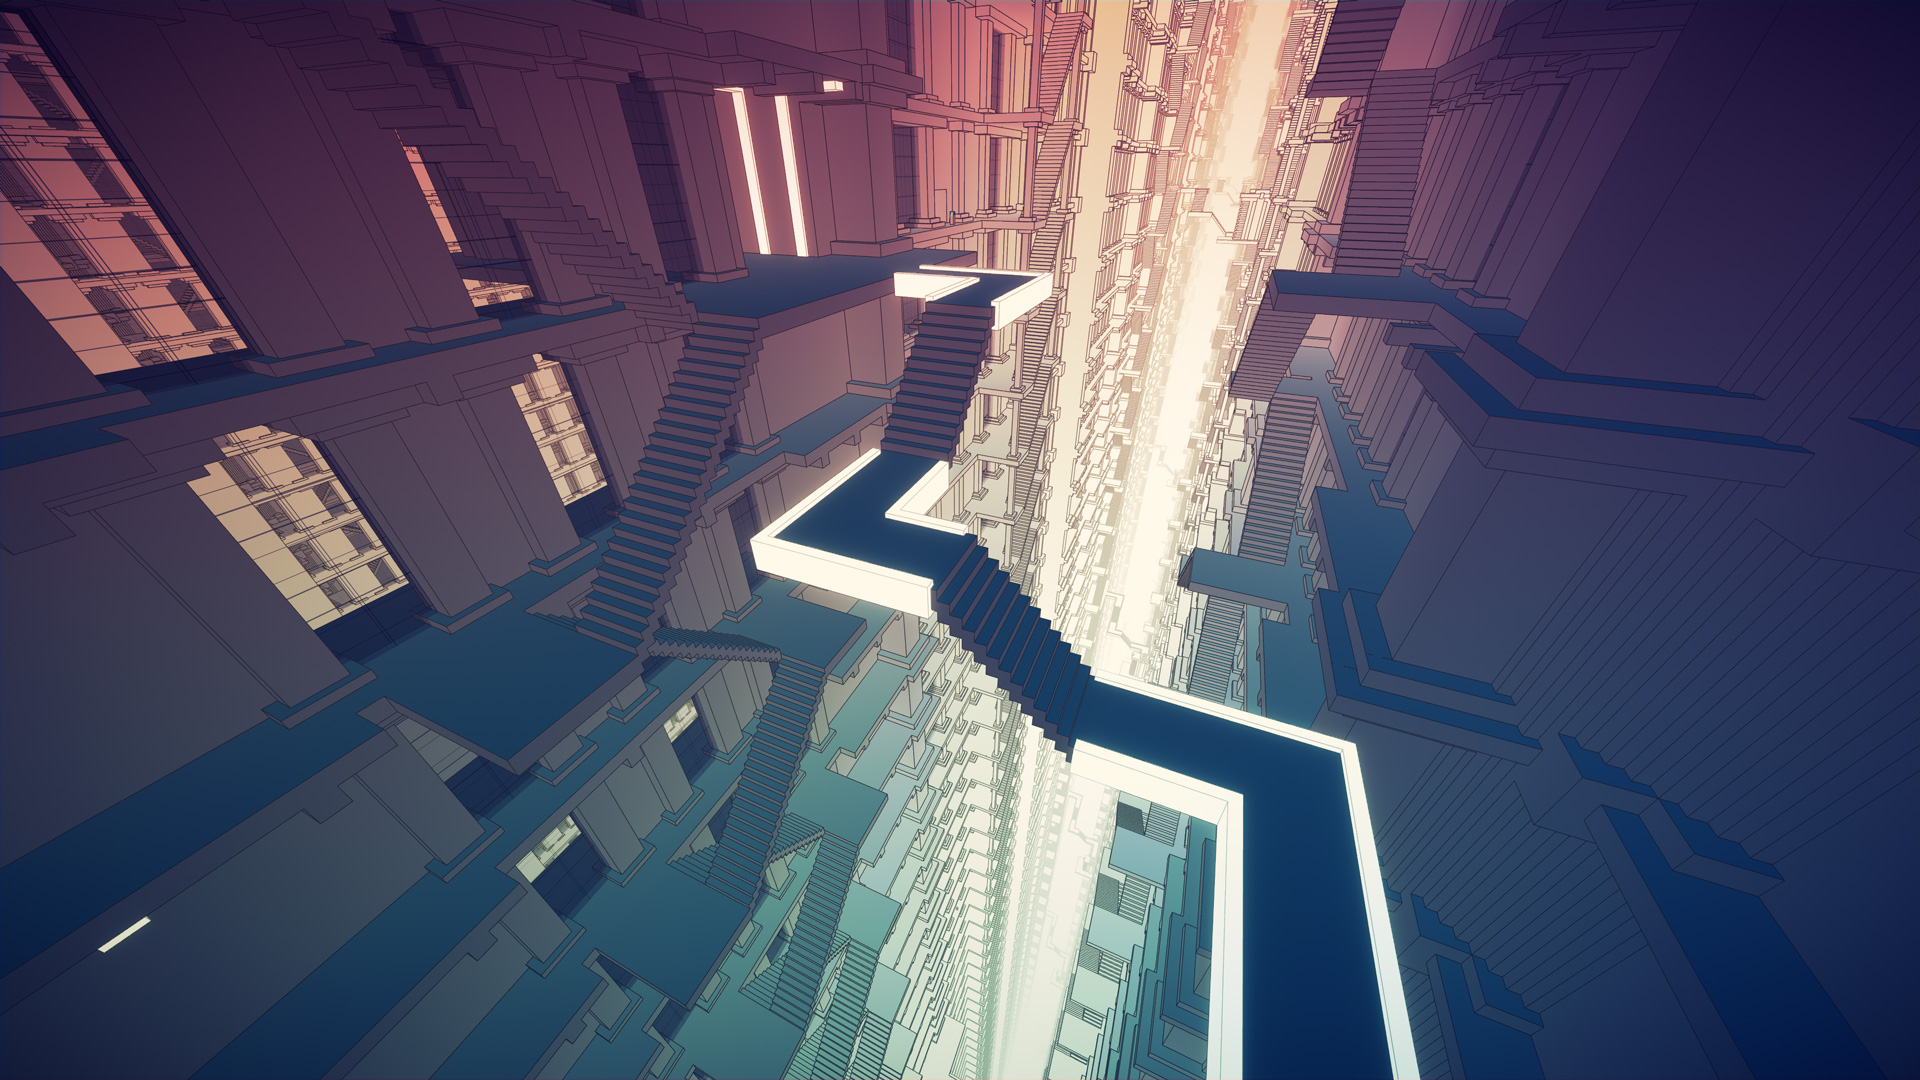 Critically Acclaimed Manifold Garden Launches Today on Xbox One